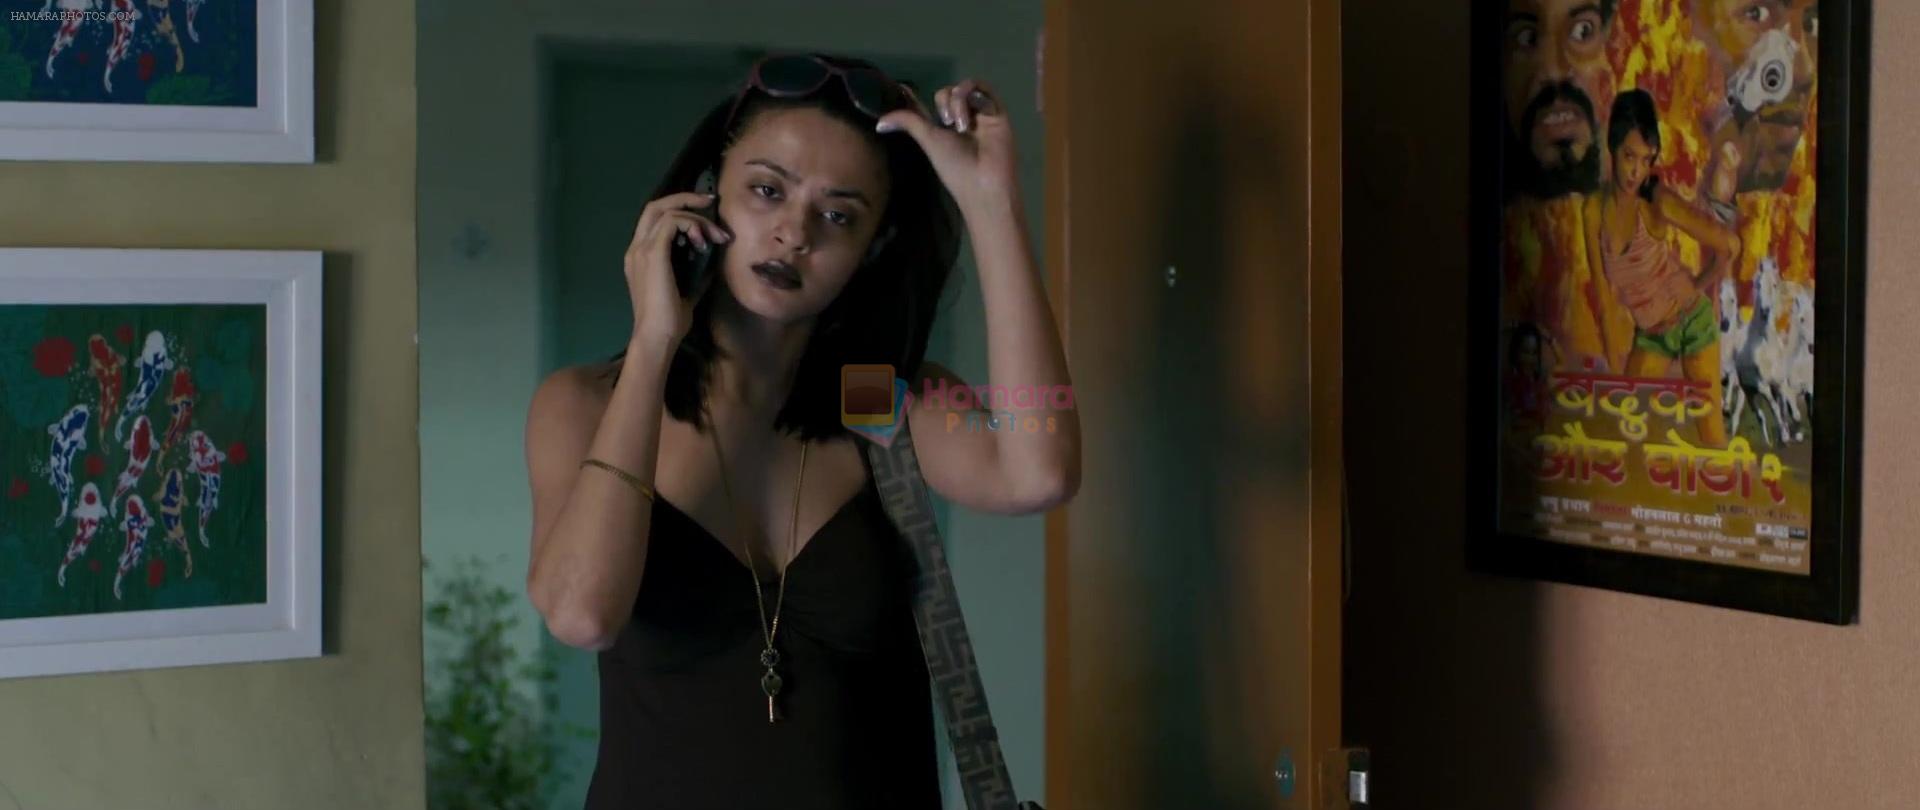 Surveen Chawla in still from the movie Ugly